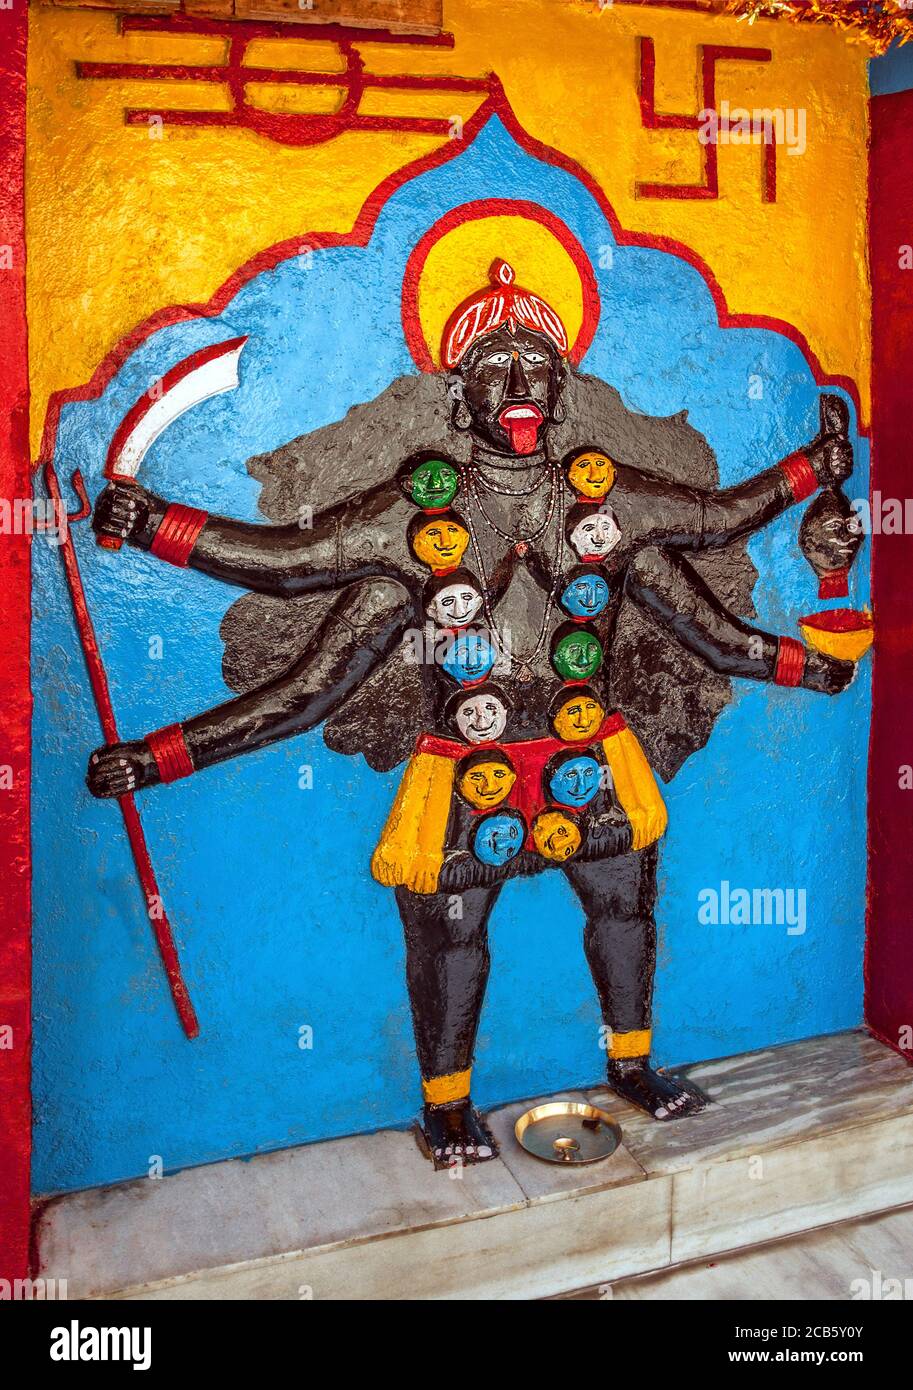 Statue of the many-armed Shiva at the temple wall with a swastika as a symbol of the movement of life in Spiti valley, India Stock Photo